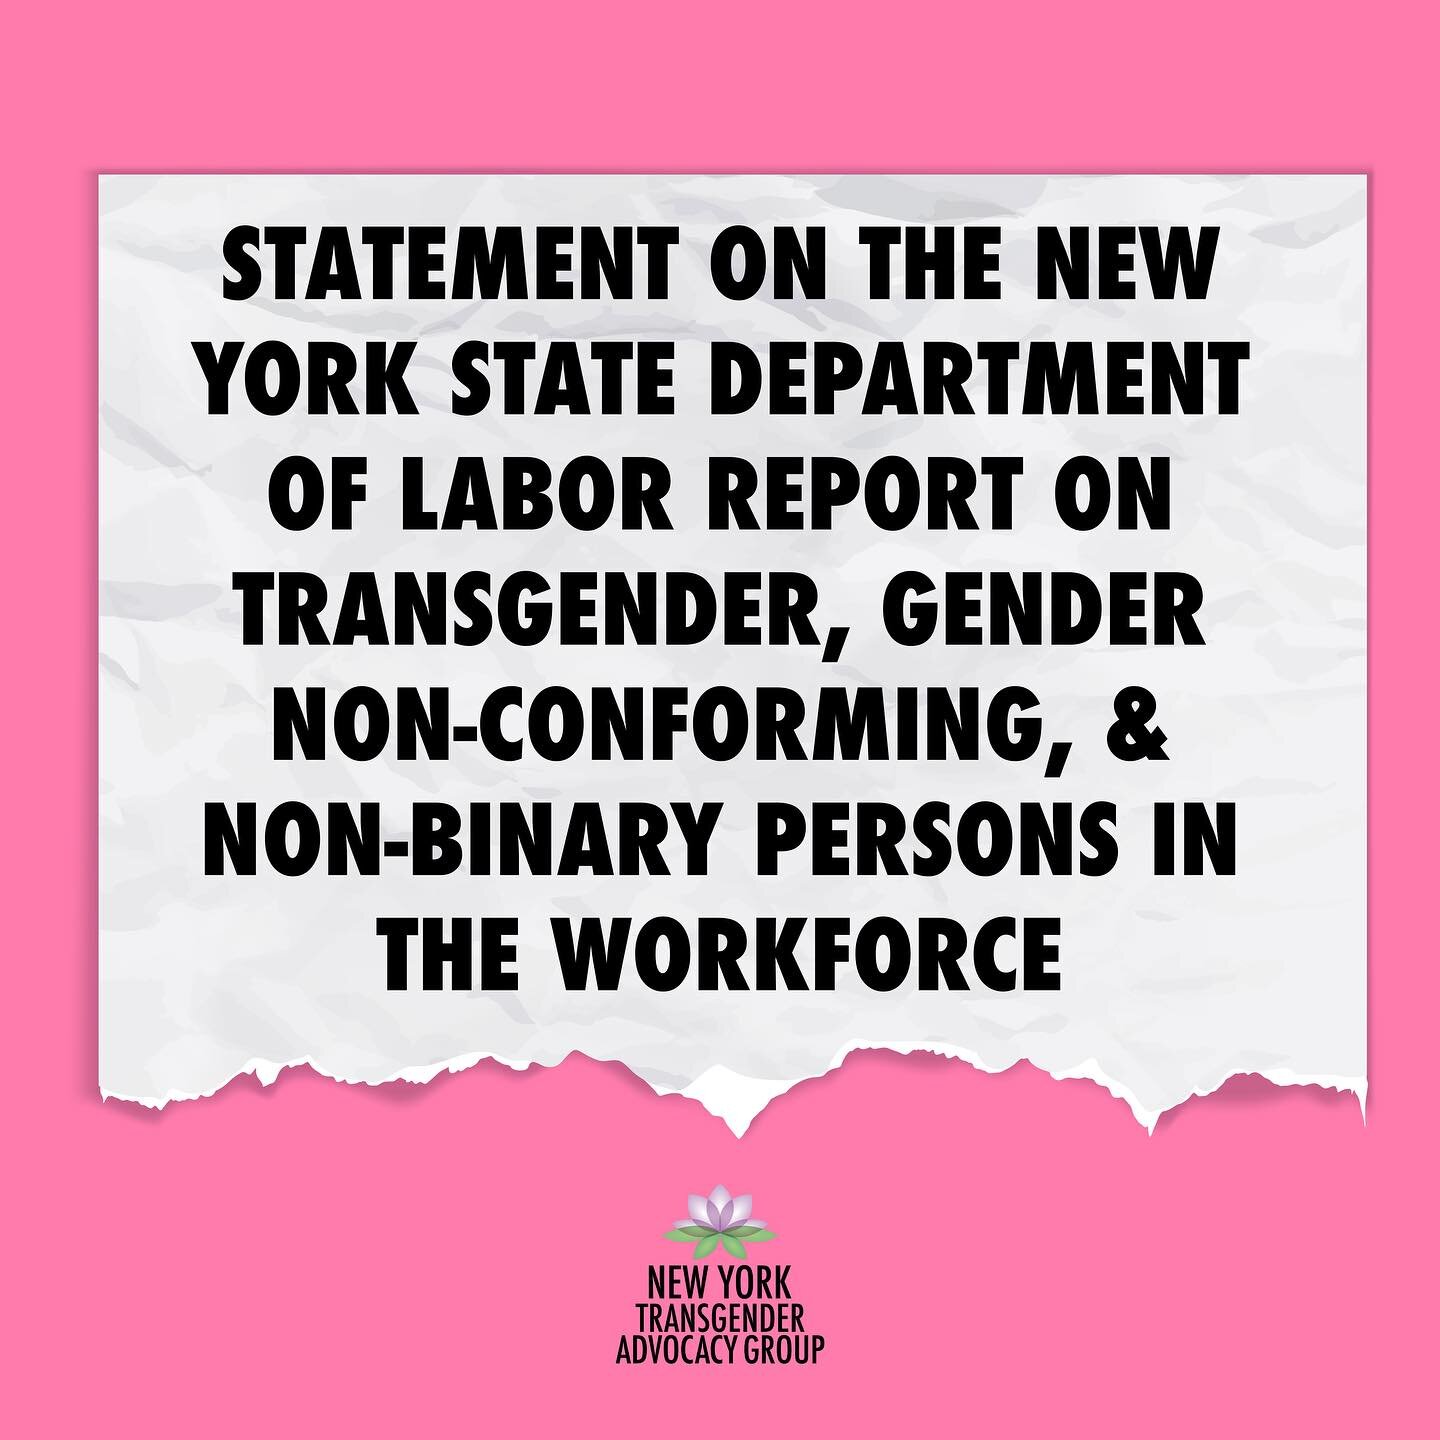 Statement from our Founder and Co-Executive Director of Programs, Kiara St James, on the recent @nyslabor Report on Transgender, Gender Non-Conforming, &amp; Non-Binary People in the workforce.

NYTAG was instrumental in advocating for the legislatio